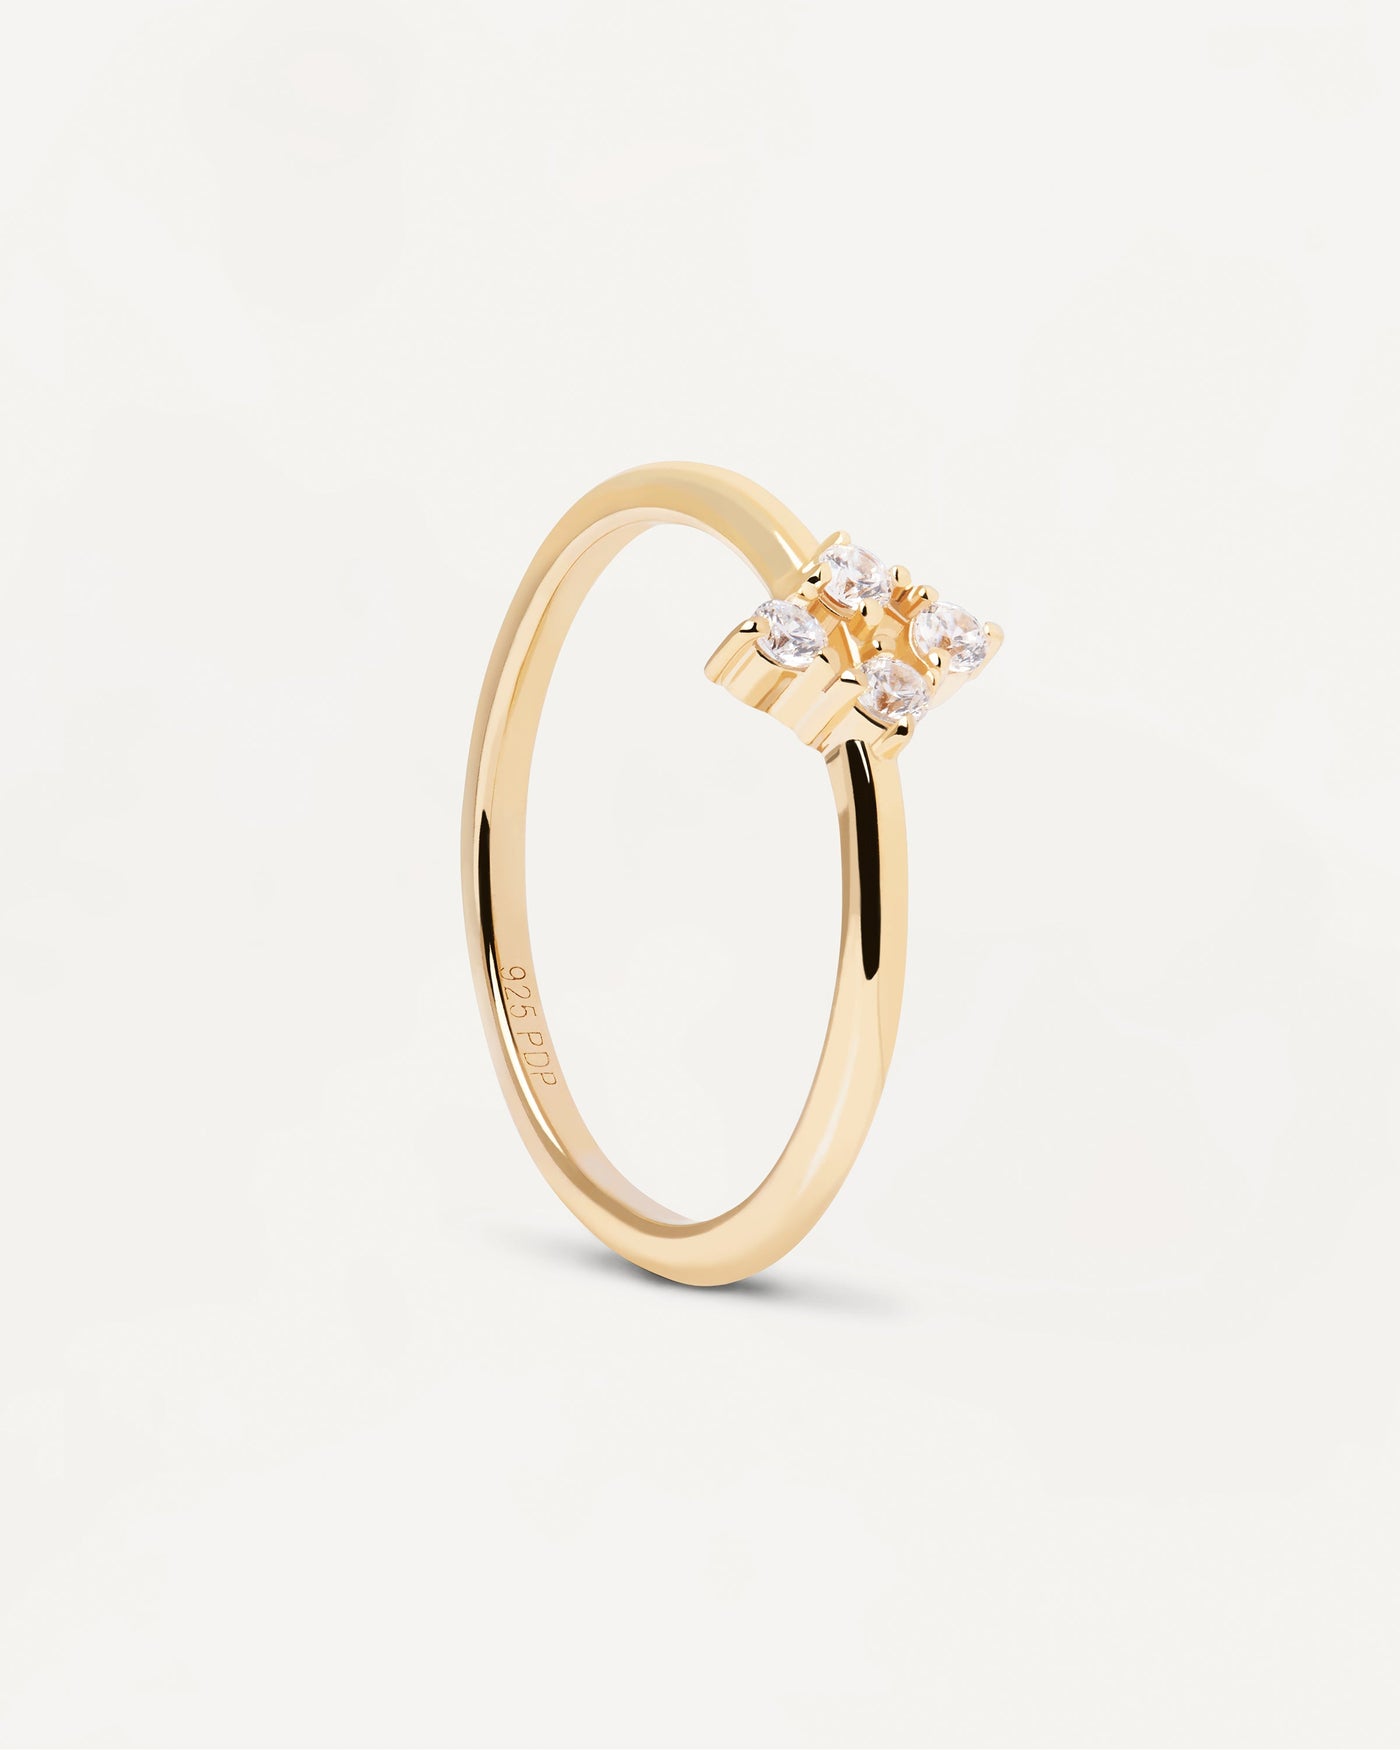 2024 Selection | Arda Ring. Basic ring in gold-plated silver with dainty white crystals. Get the latest arrival from PDPAOLA. Place your order safely and get this Best Seller. Free Shipping.